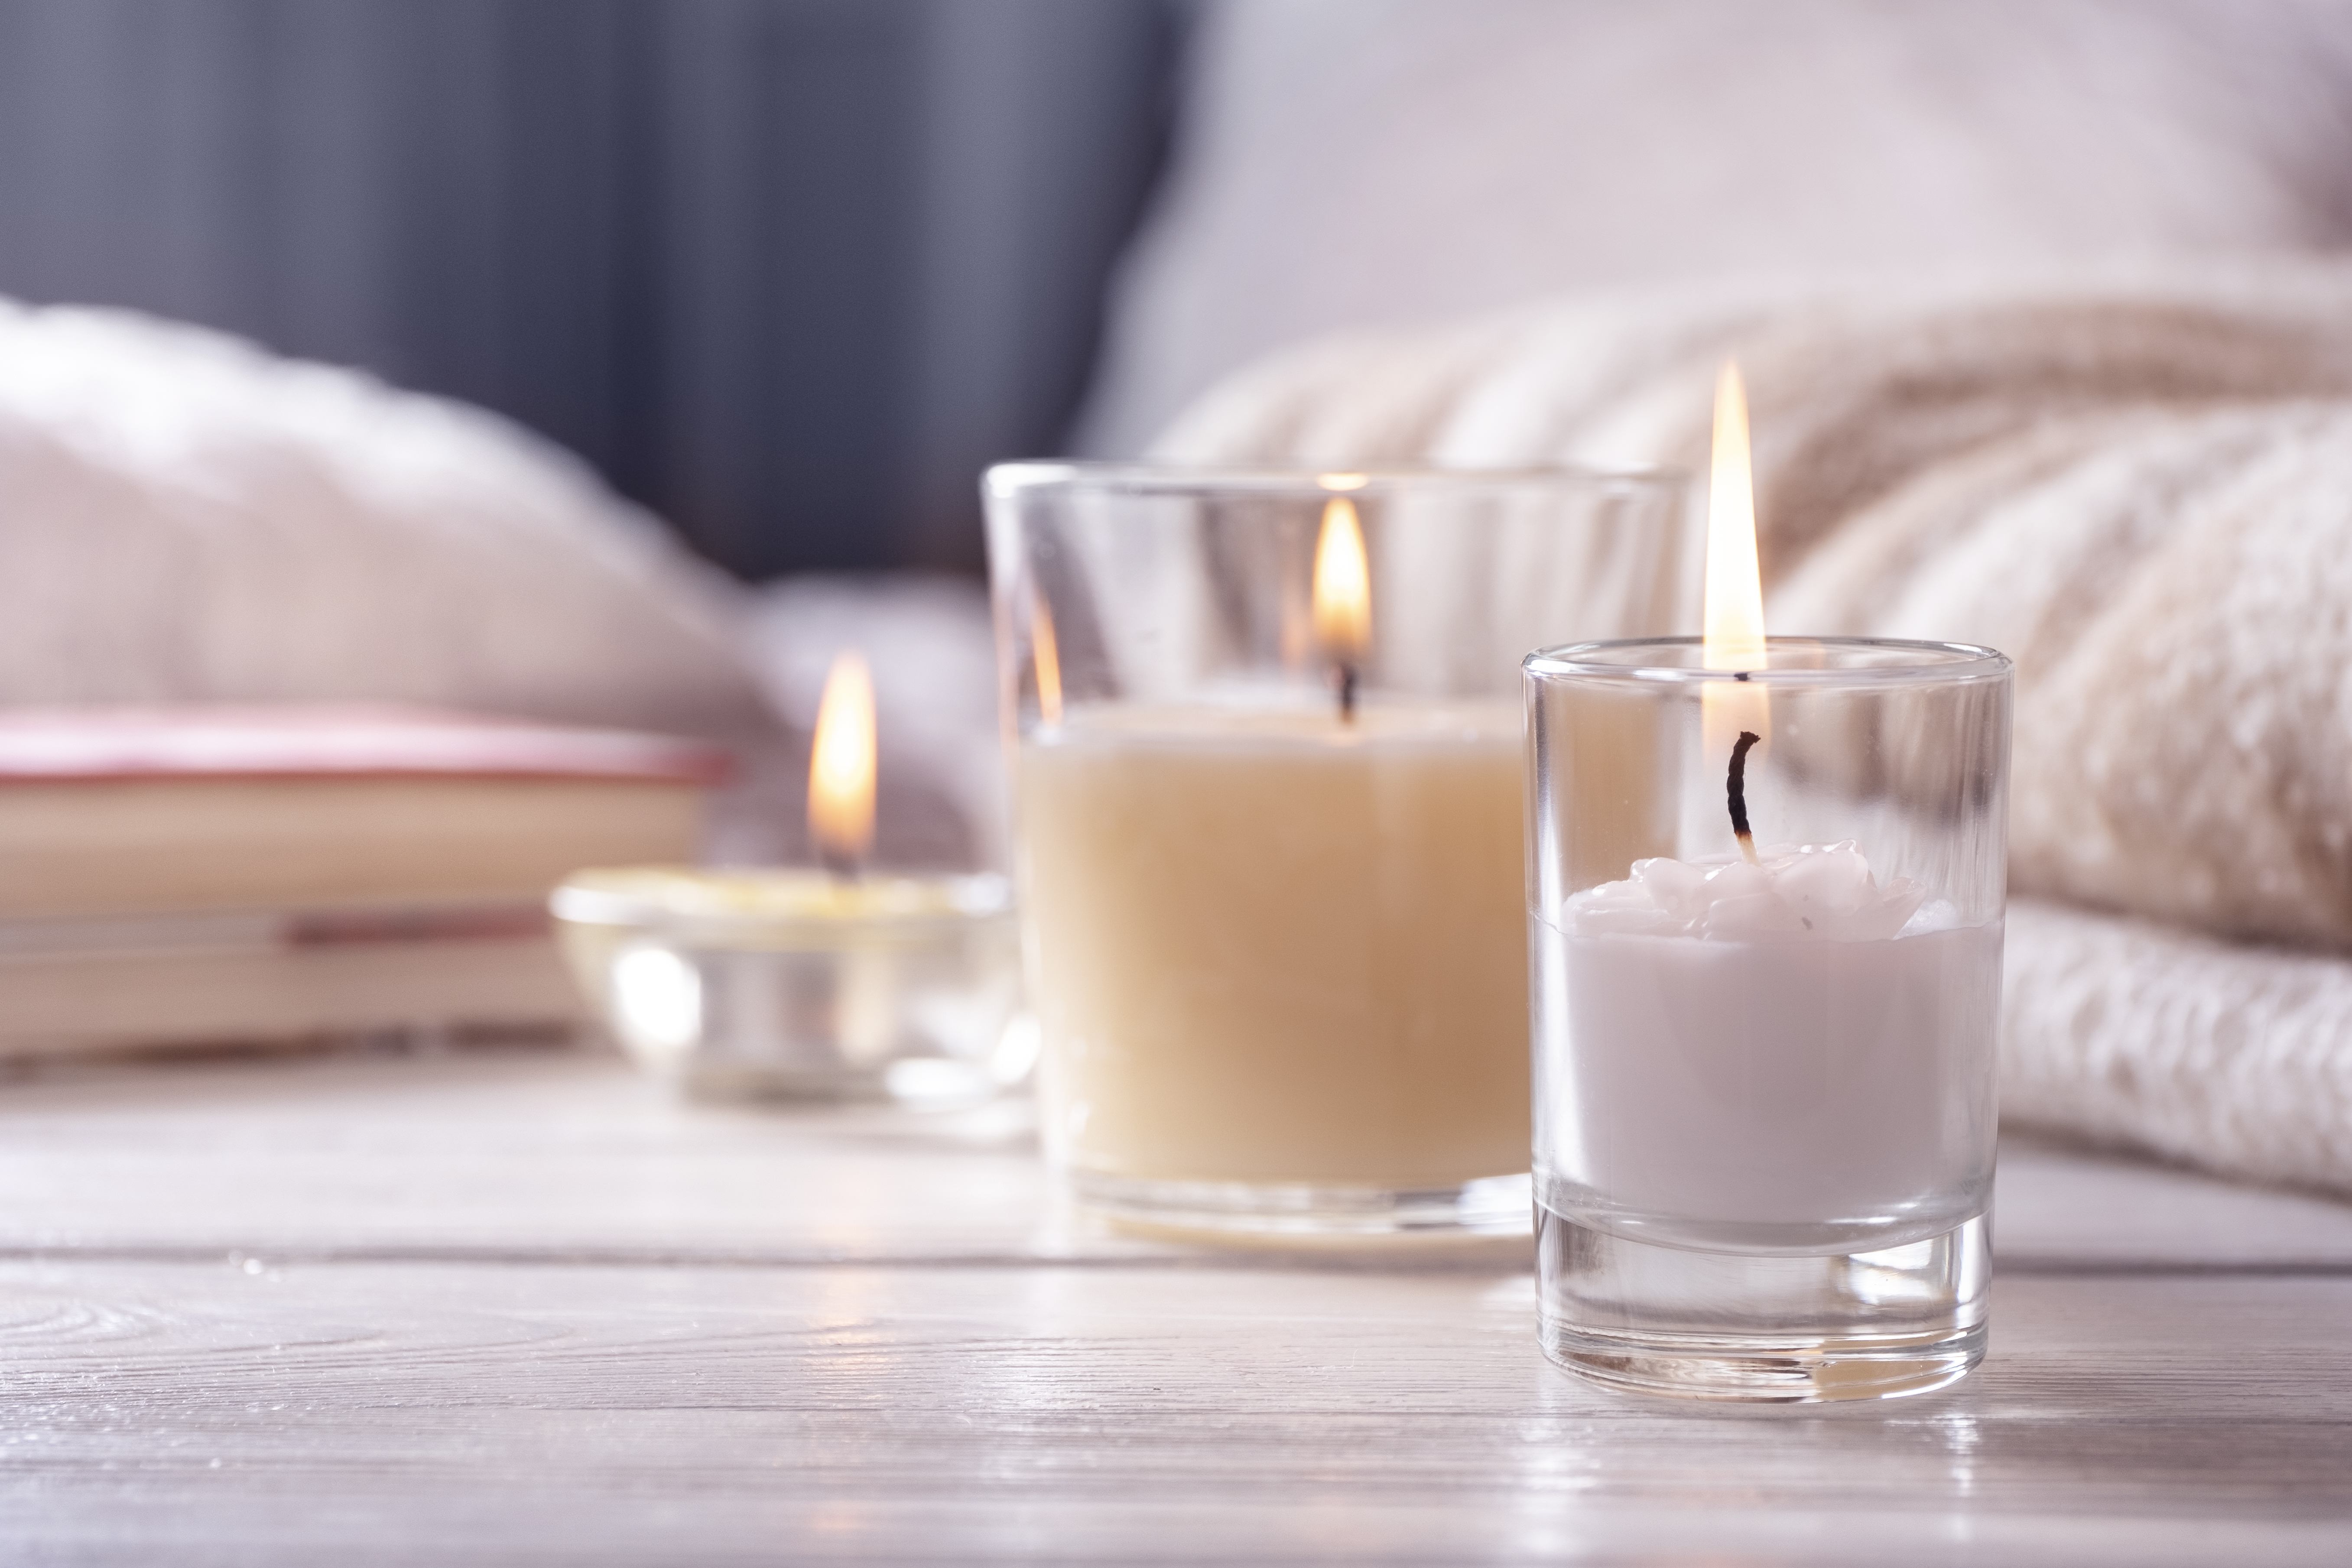 How to Make Wood Wick Candles (7 steps): Full-Length Guide